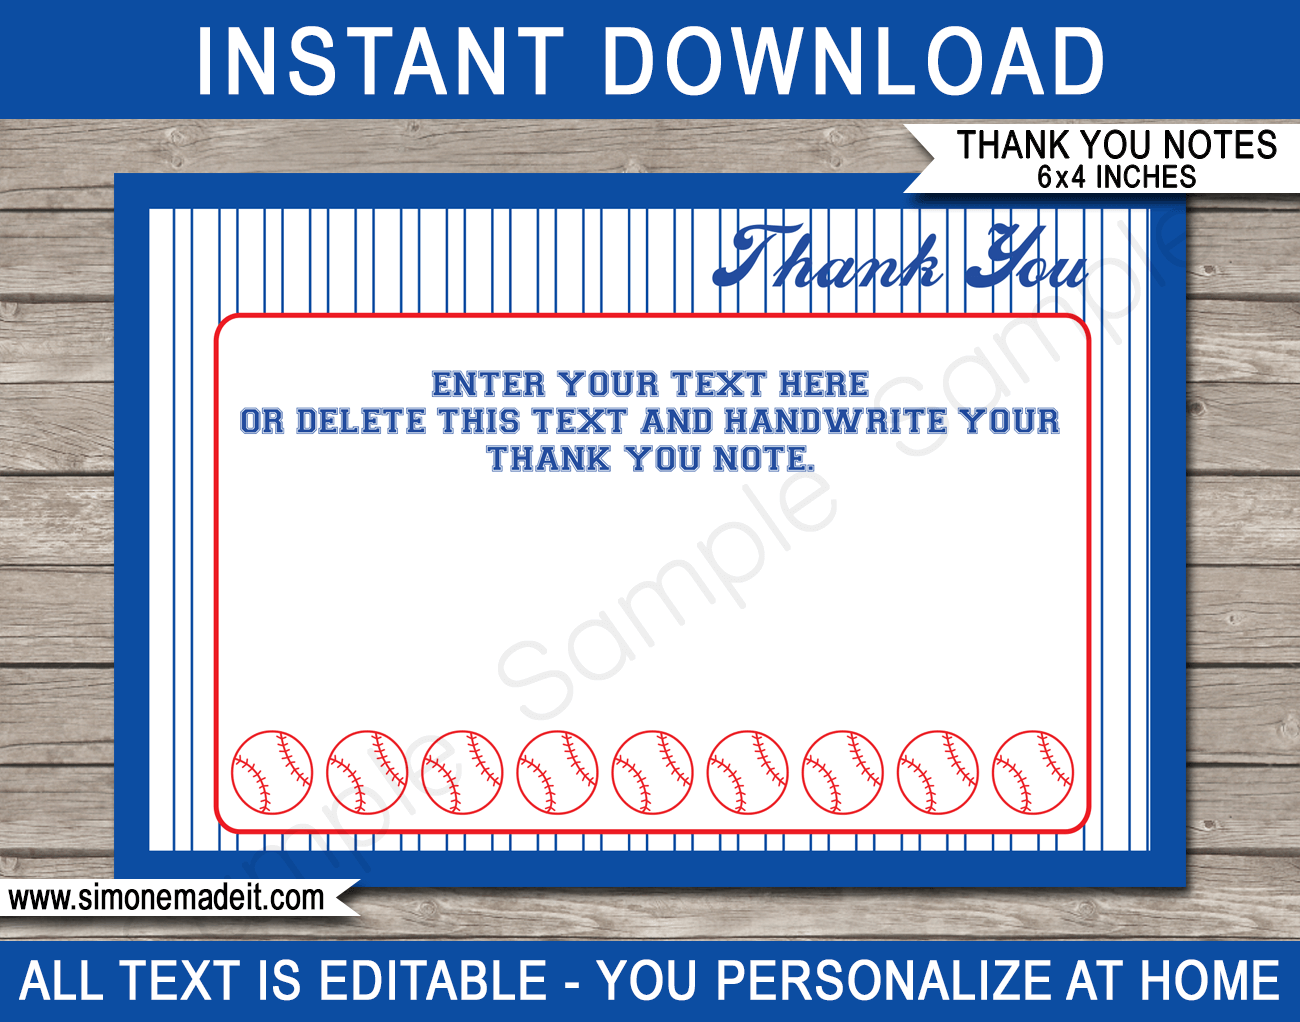 Printable Baseball Party Thank You Cards - Favor Tags - Baseball Birthday Party theme - Sports Party - Editable Template - Instant Download via simonemadeit.com